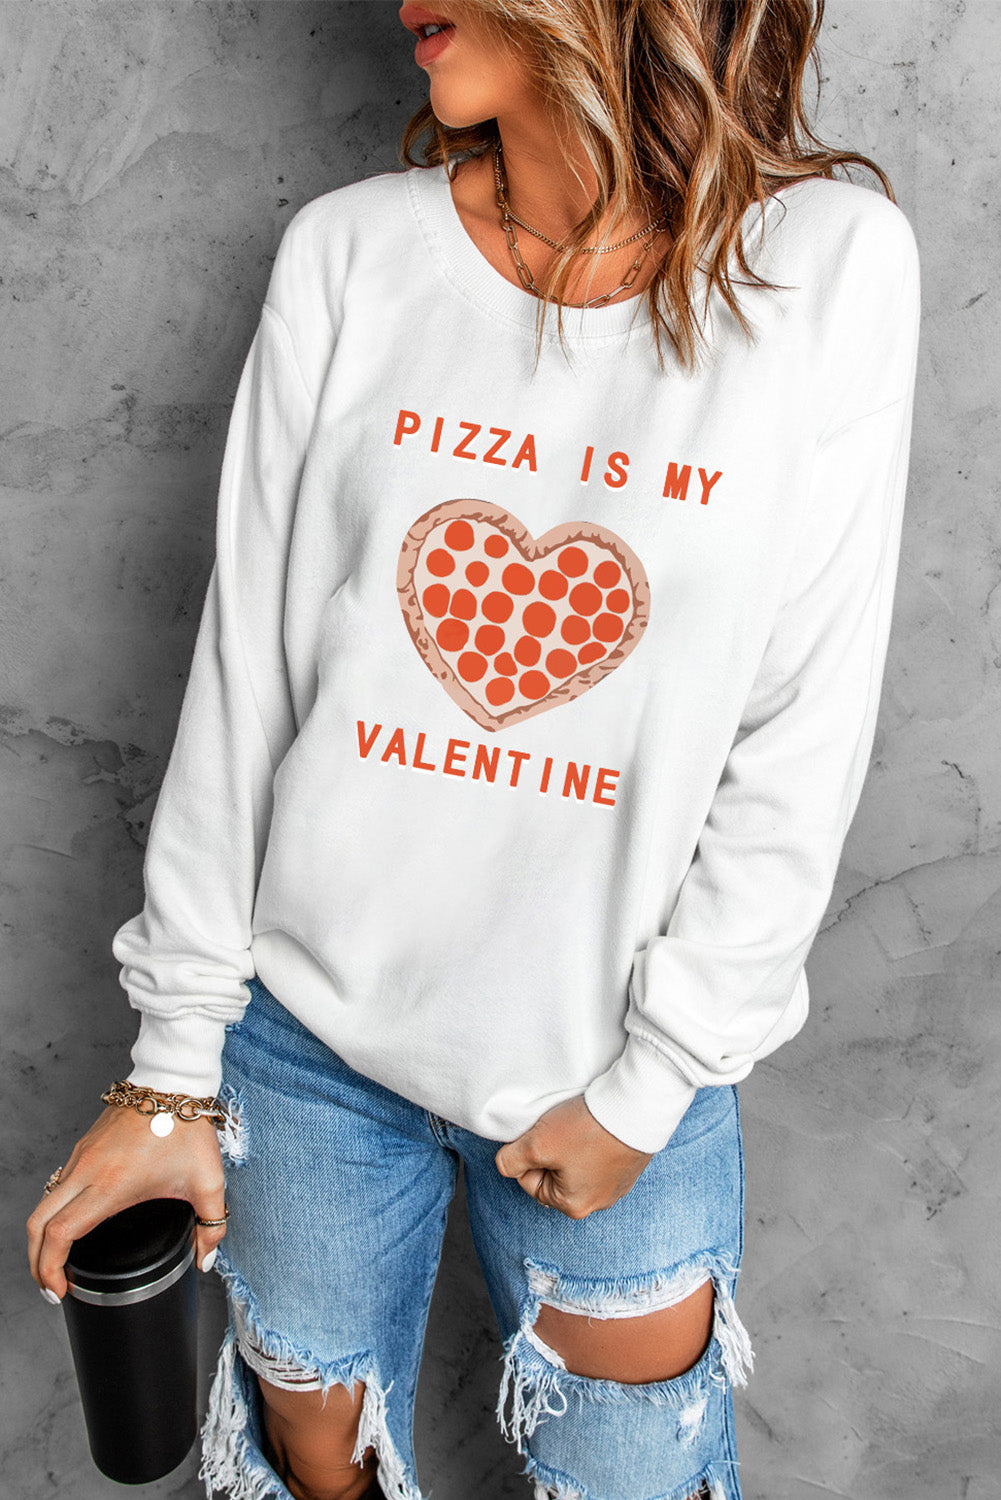 White PIZZA IS MY VALENTINE Graphic Print Sweatshirt, Shop for cheap White PIZZA IS MY VALENTINE Graphic Print Sweatshirt online? Buy at Modeshe.com on sale!